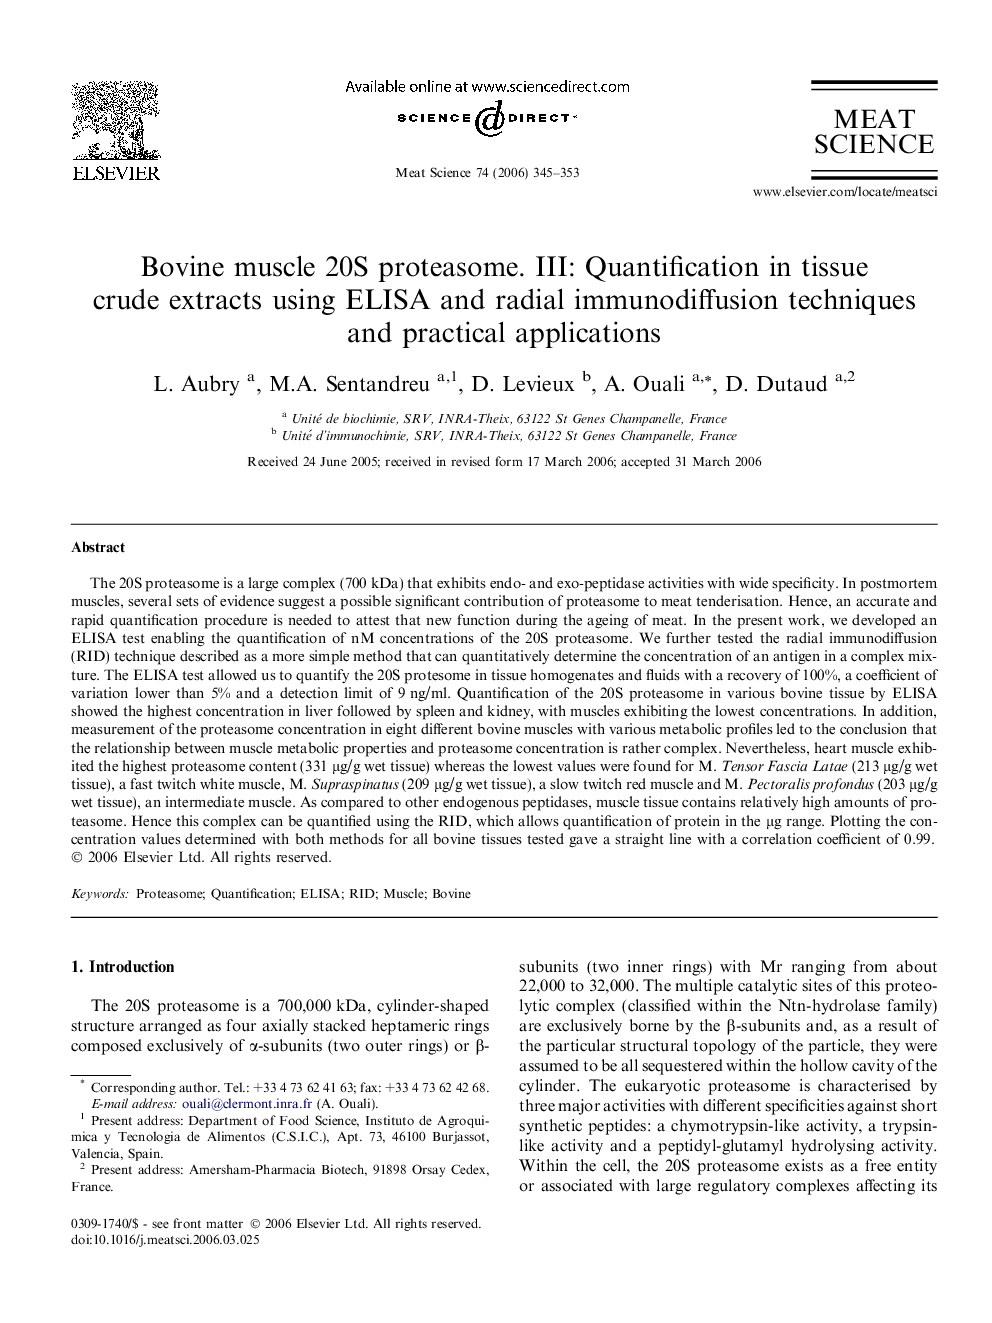 Bovine muscle 20S proteasome. III: Quantification in tissue crude extracts using ELISA and radial immunodiffusion techniques and practical applications